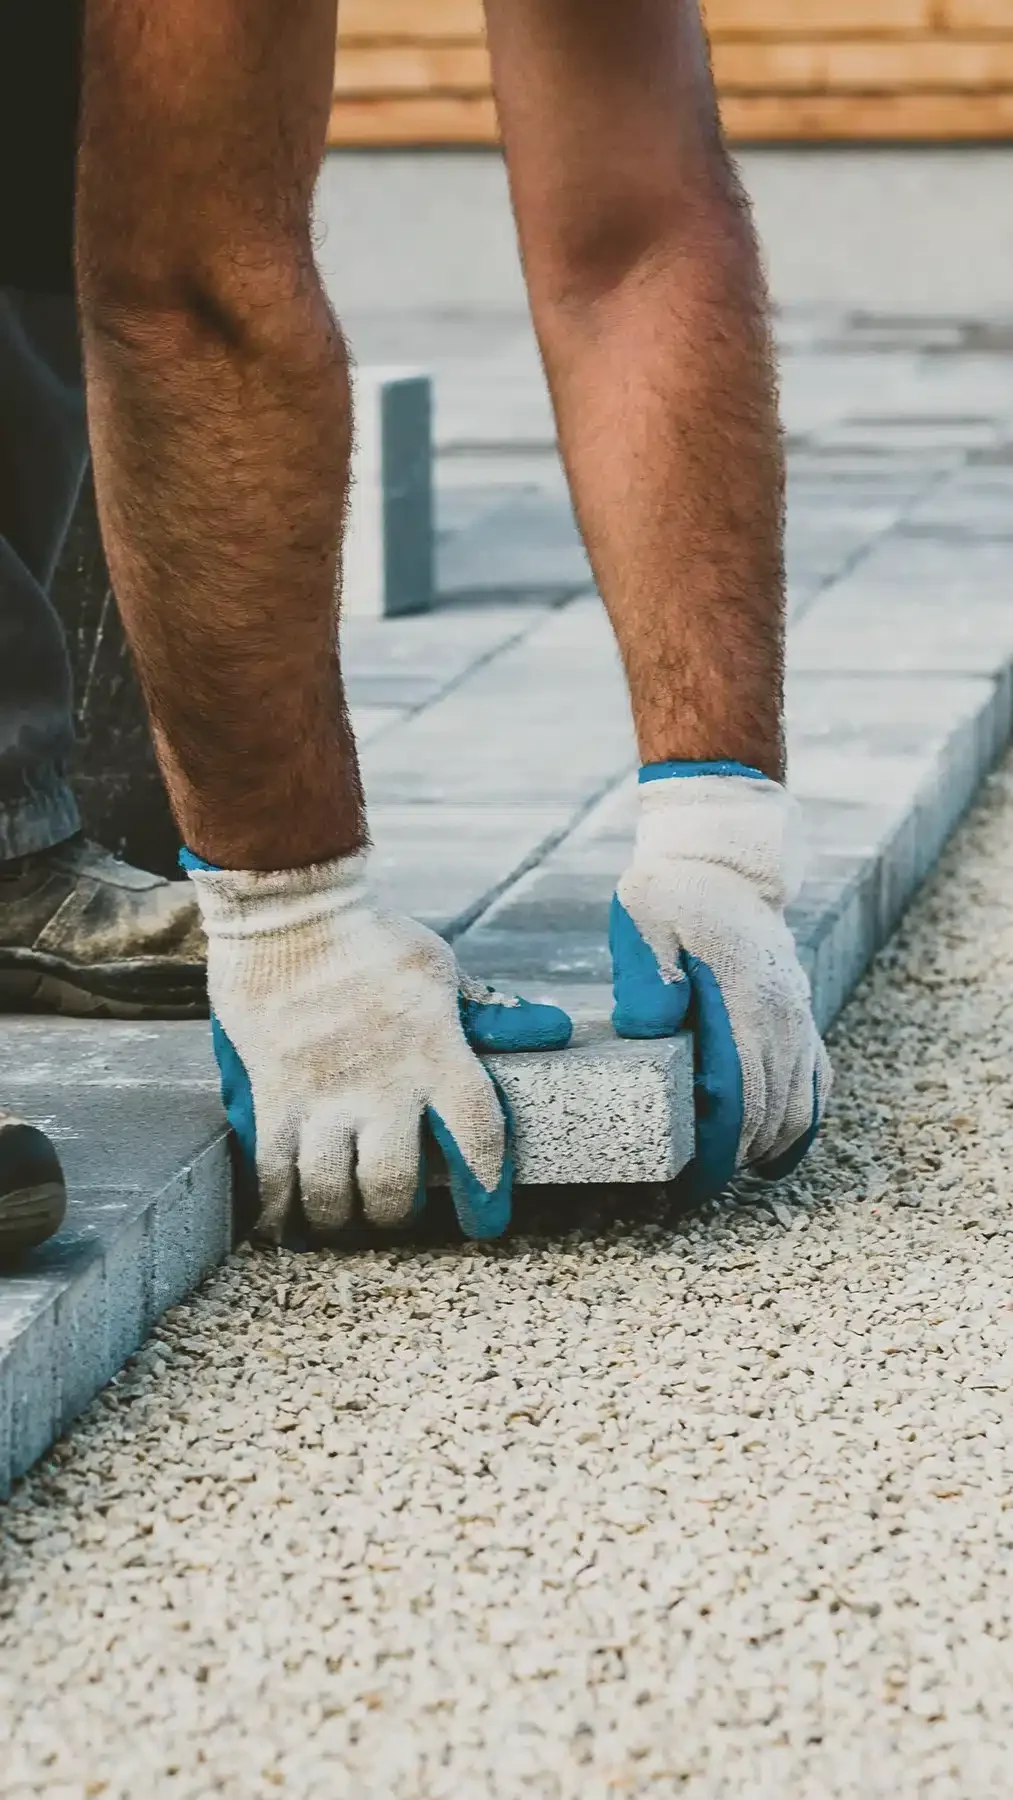 A close-up of a person’s hands wearing white and blue work gloves, placing a concrete paver into position on a gravel bed. The image shows part of the person’s legs and work boots, emphasizing the construction and hands-on aspect of laying a stone patio.